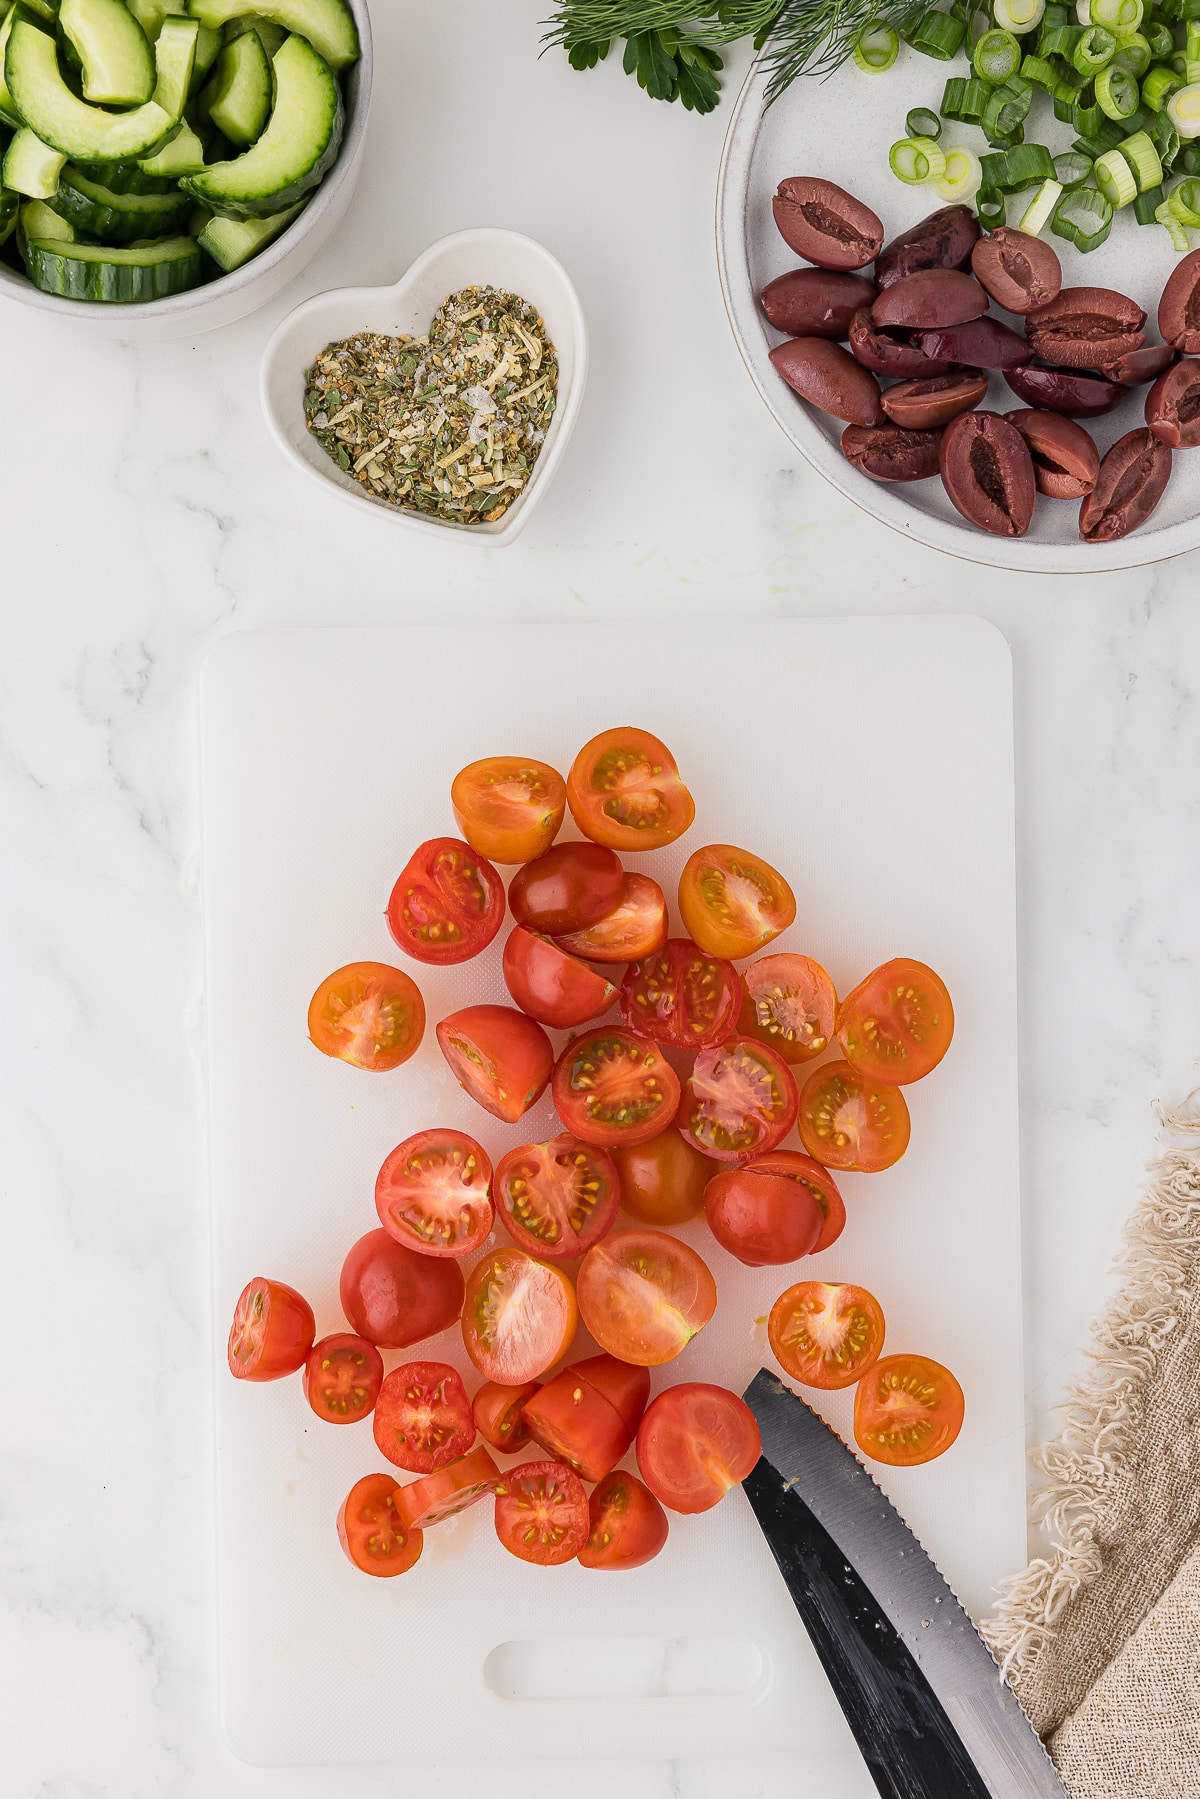 Sliced cherry tomatoes on a cutting board surrounded by olives, onions, cucumbers and spices